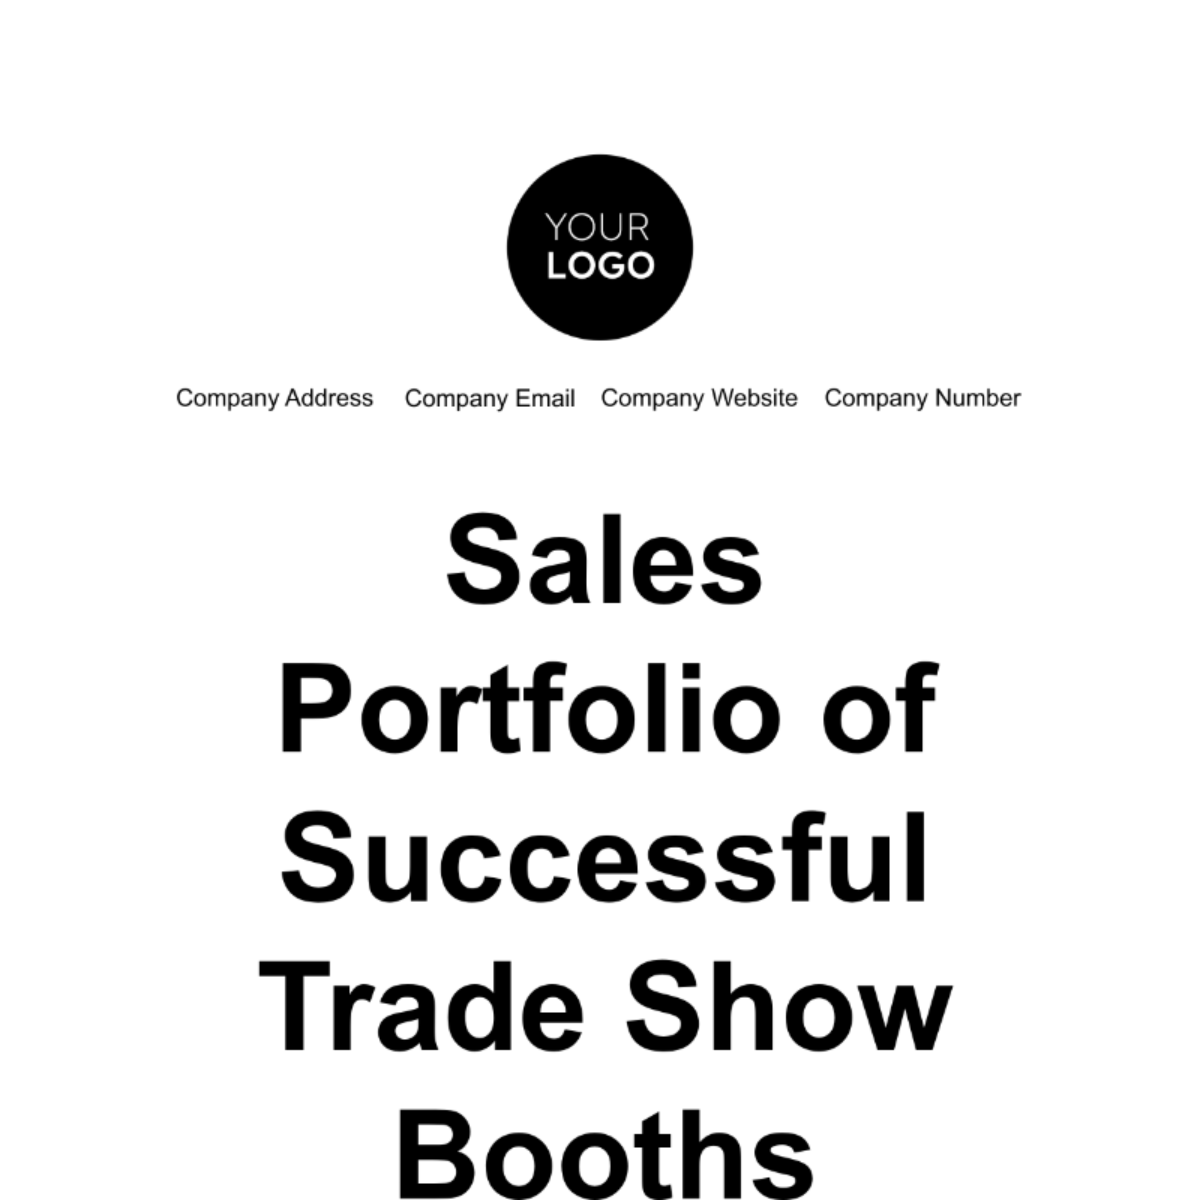 Sales Portfolio of Successful Trade Show Booths Template